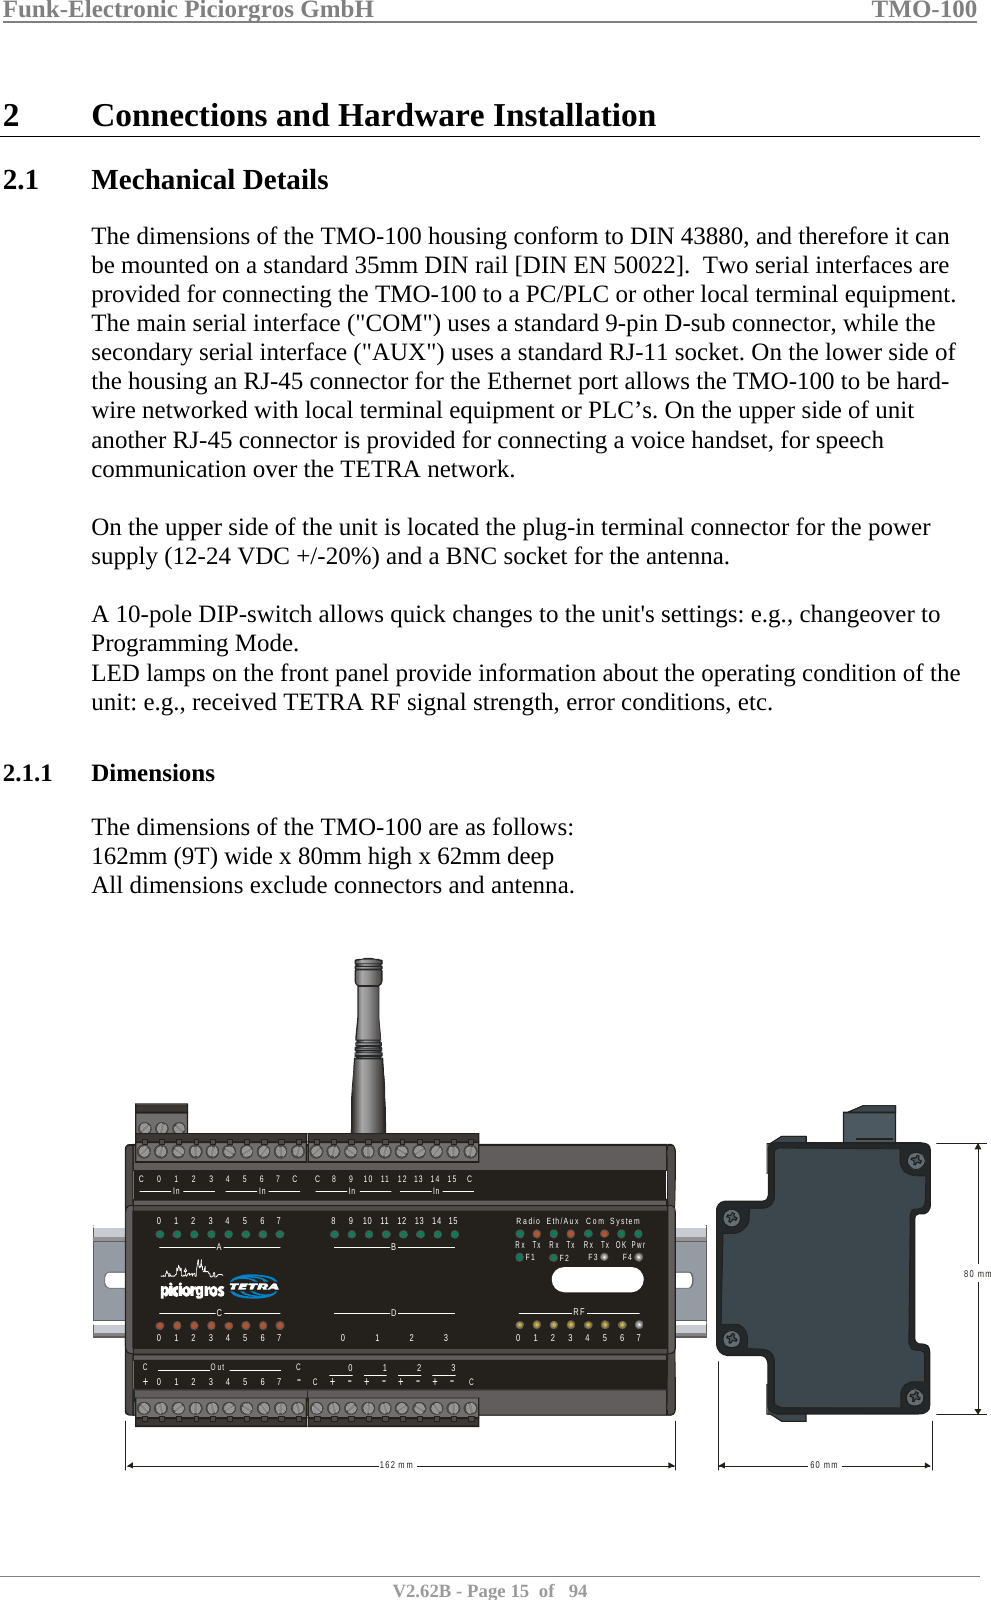 Funk-Electronic Piciorgros GmbH   TMO-100   V2.62B - Page 15  of   94   2 Connections and Hardware Installation 2.1 Mechanical Details The dimensions of the TMO-100 housing conform to DIN 43880, and therefore it can be mounted on a standard 35mm DIN rail [DIN EN 50022].  Two serial interfaces are provided for connecting the TMO-100 to a PC/PLC or other local terminal equipment. The main serial interface (&quot;COM&quot;) uses a standard 9-pin D-sub connector, while the secondary serial interface (&quot;AUX&quot;) uses a standard RJ-11 socket. On the lower side of the housing an RJ-45 connector for the Ethernet port allows the TMO-100 to be hard-wire networked with local terminal equipment or PLC’s. On the upper side of unit another RJ-45 connector is provided for connecting a voice handset, for speech communication over the TETRA network.   On the upper side of the unit is located the plug-in terminal connector for the power supply (12-24 VDC +/-20%) and a BNC socket for the antenna.   A 10-pole DIP-switch allows quick changes to the unit&apos;s settings: e.g., changeover to Programming Mode.  LED lamps on the front panel provide information about the operating condition of the unit: e.g., received TETRA RF signal strength, error conditions, etc.  2.1.1 Dimensions The dimensions of the TMO-100 are as follows: 162mm (9T) wide x 80mm high x 62mm deep All dimensions exclude connectors and antenna.      RFBDAC080123001911210223113341244513556146671577CCOut CC+++++-----012301234567CC0819210311412513614In InIn In715CC80 mm60 mm162 mmRadioRx Rx RxTx Tx Tx OK PwrEth/Aux SystemComF1 F2 F4F3